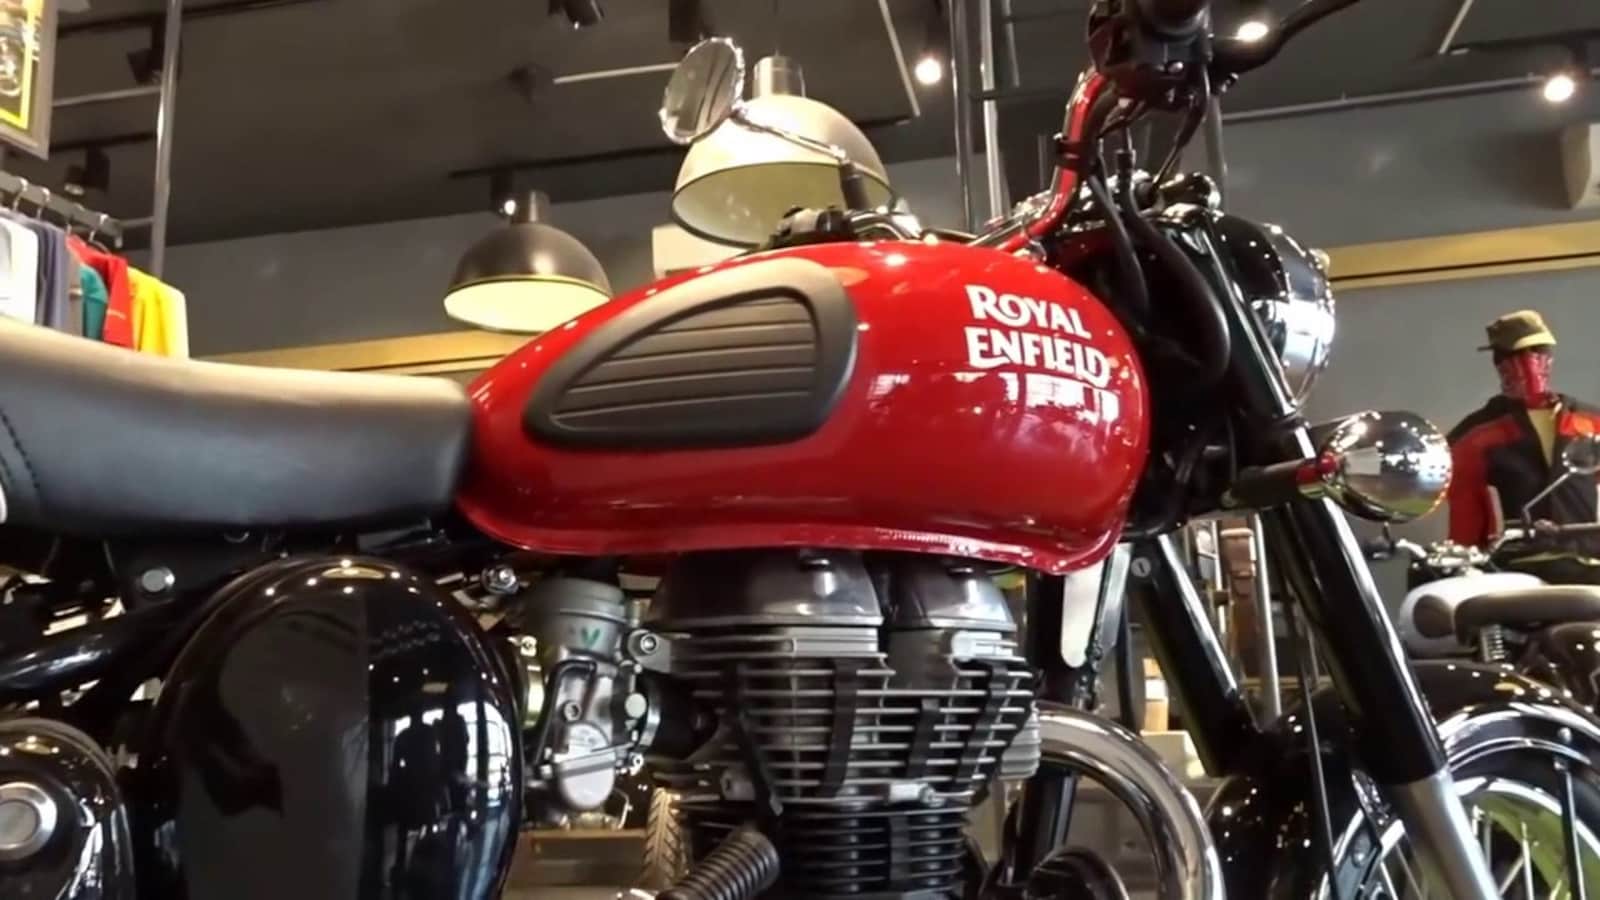 Royal Enfield launches Classic 350 Redditch Edition with rear disc brake